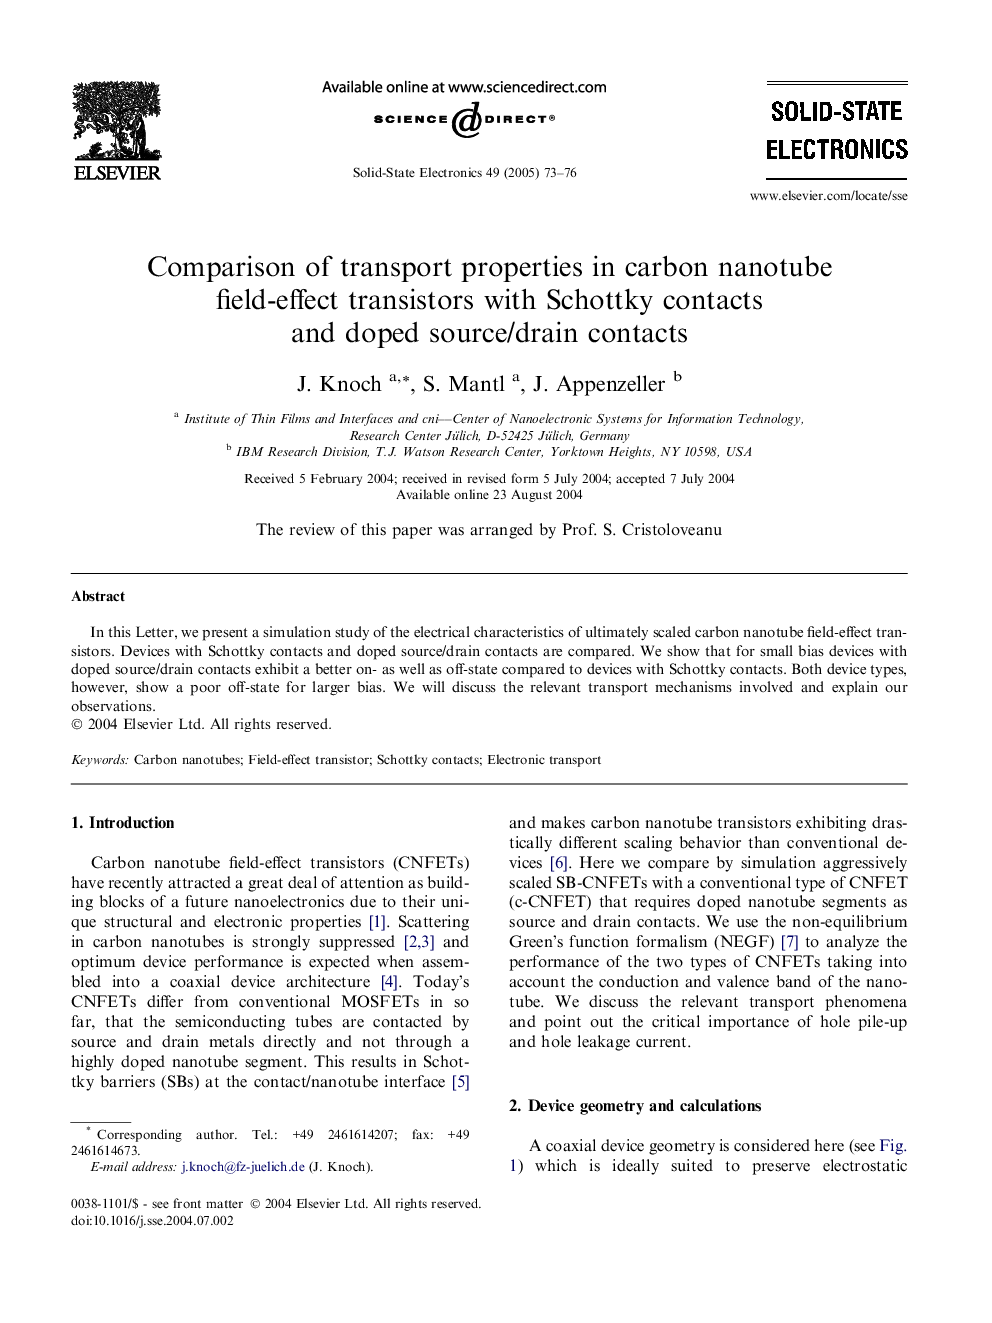 Comparison of transport properties in carbon nanotube field-effect transistors with Schottky contacts and doped source/drain contacts